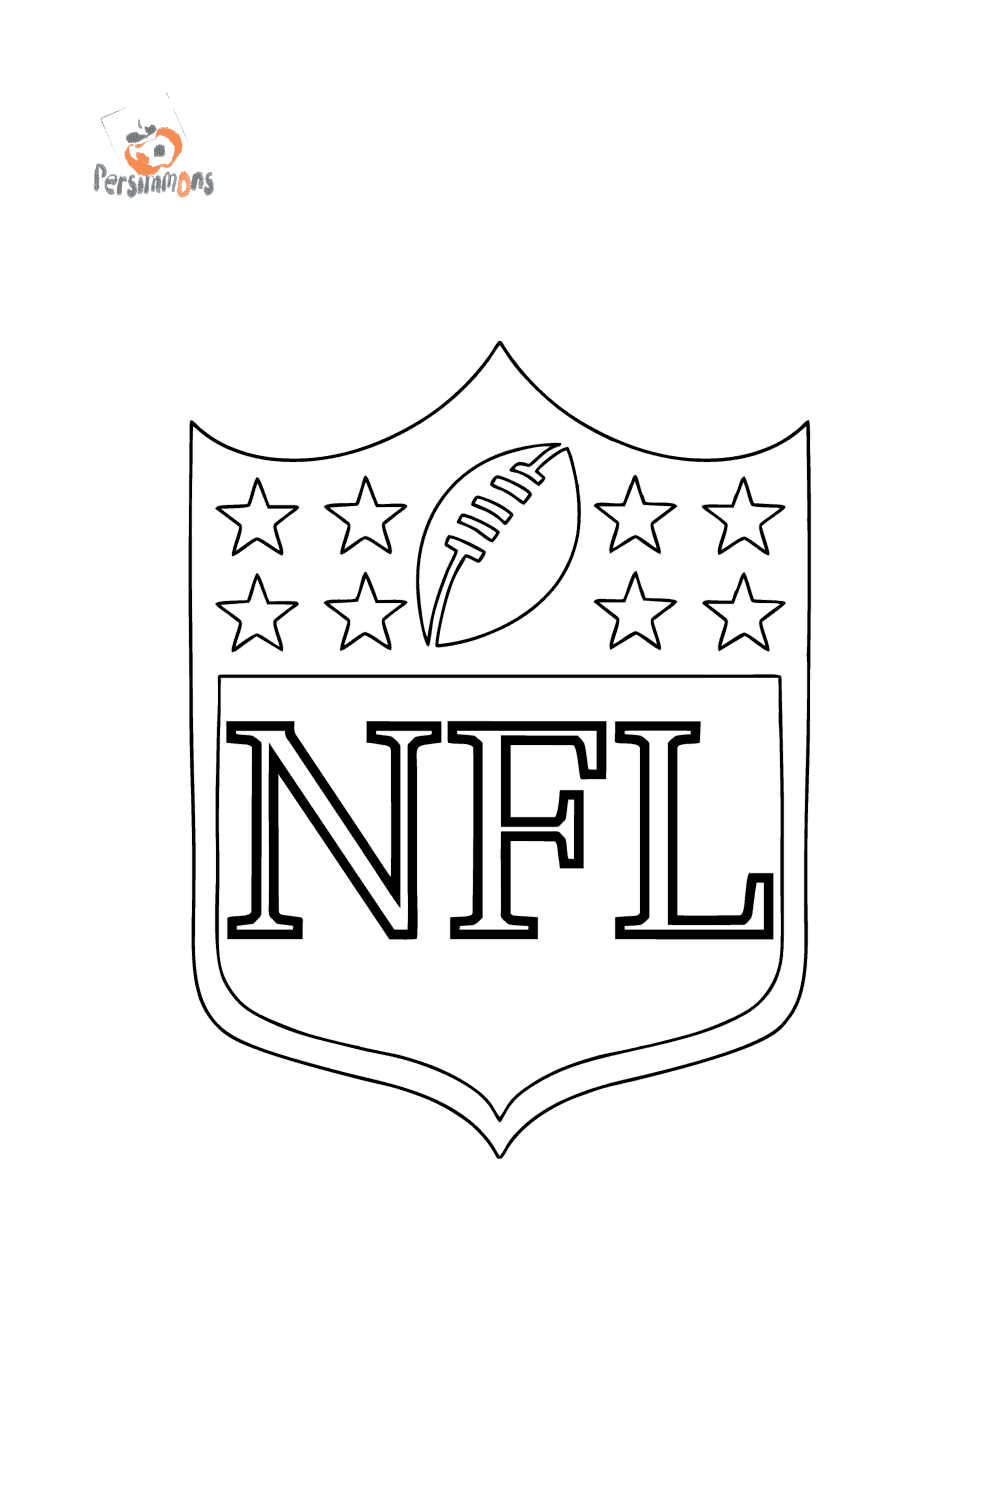 NFL Logo сoloring page ♥ Online and Print for Free!